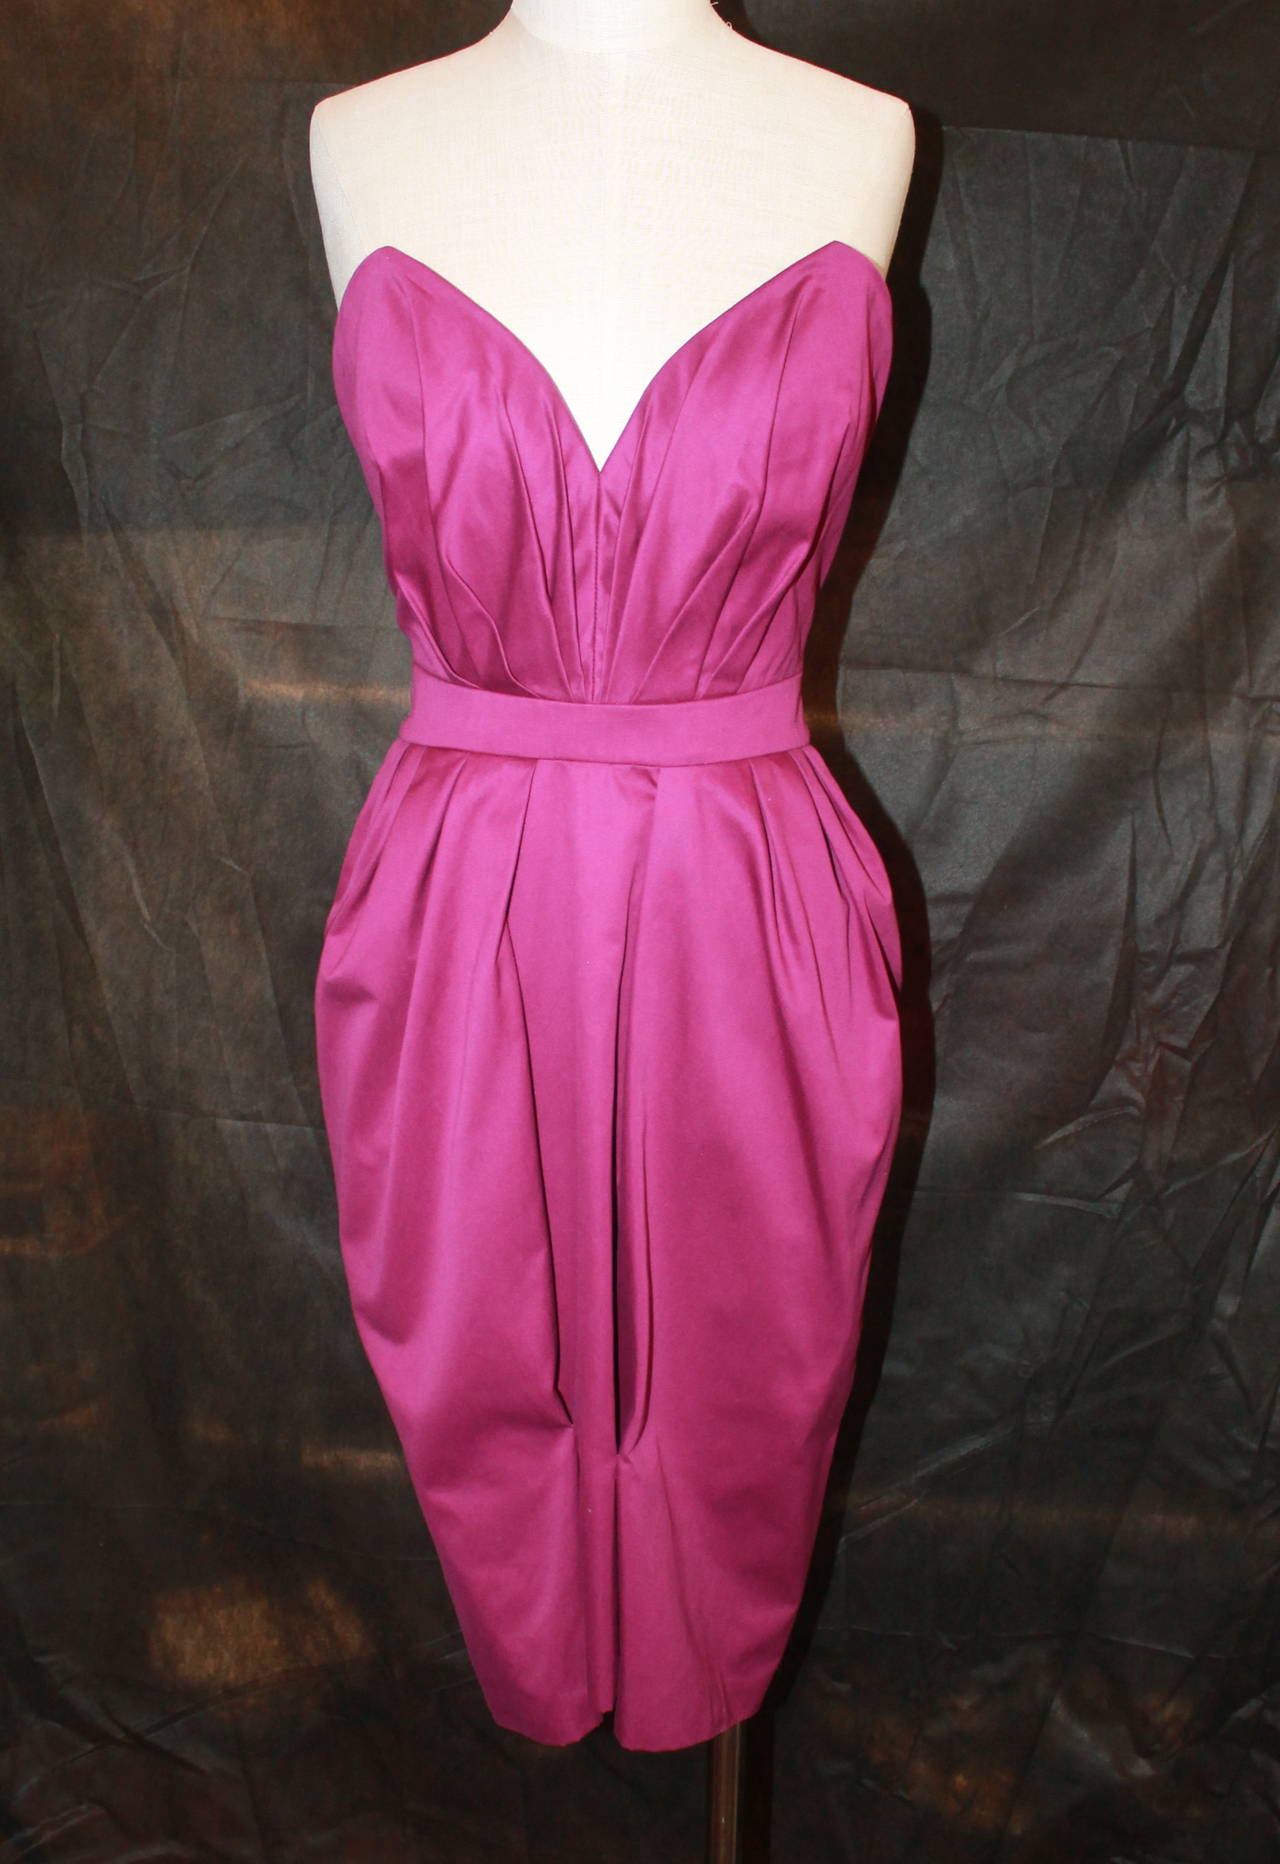 YSL Fushia Strapless Dress with Bolero/Caplet Jacket - S. This dress is in very good condition with little signs of wear. 

Measurements:
Dress Bust- 28"
Dress Waist- 26"
Dress Hips- up to 38"
Dress Length- 30" (centerback